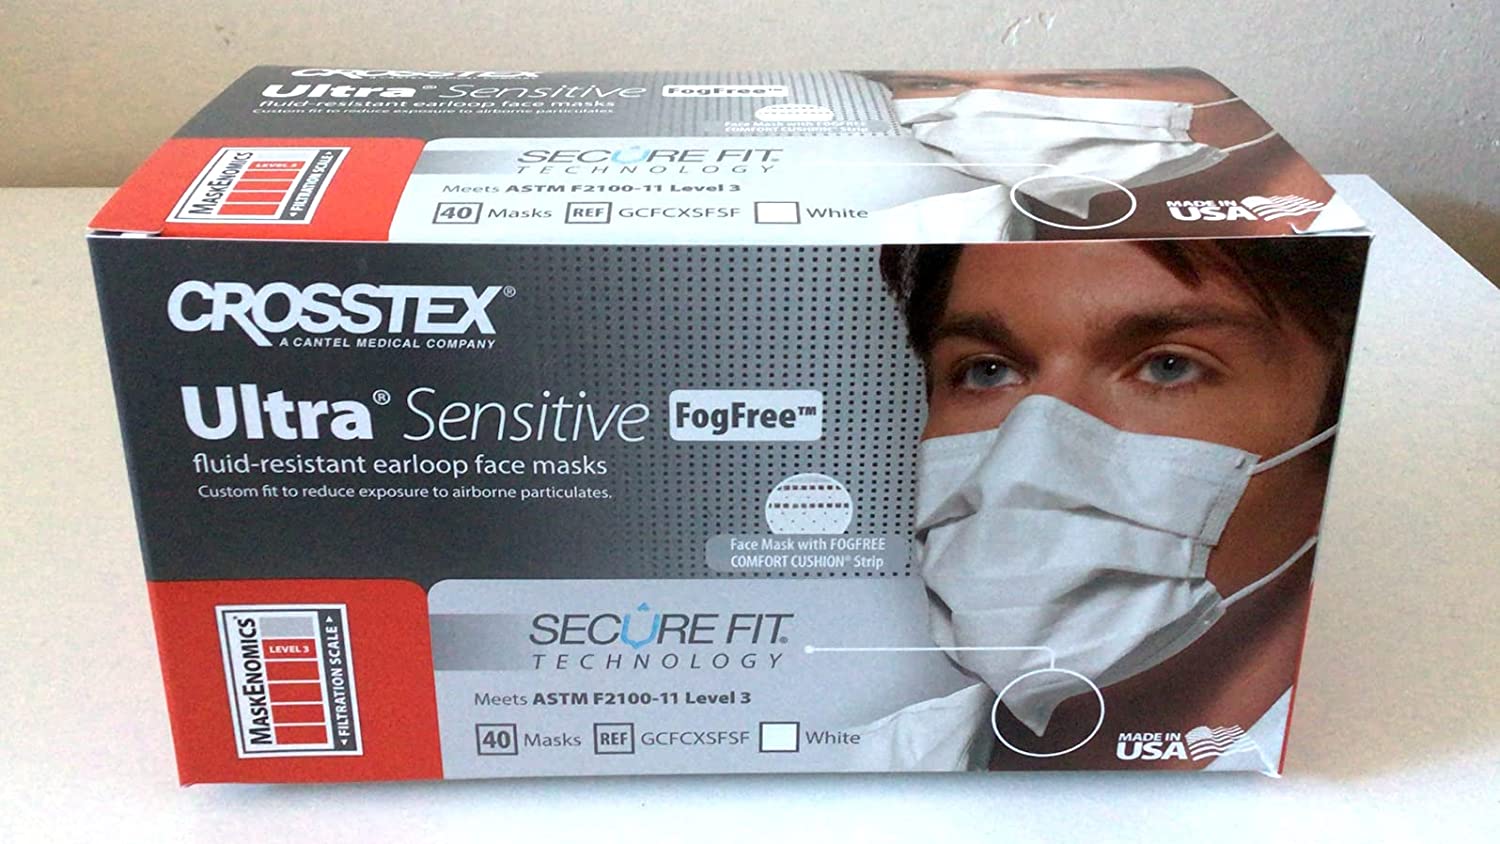 Crosstex Ultra Sensitive GCFCXSSF - Earloop Mask With Secure Fit Mask Technology,  ASTM Level 3,  Hypoallergenic, Latex-Free Inner Cellulose Layer, White - One Size Fits Most, Box of 50